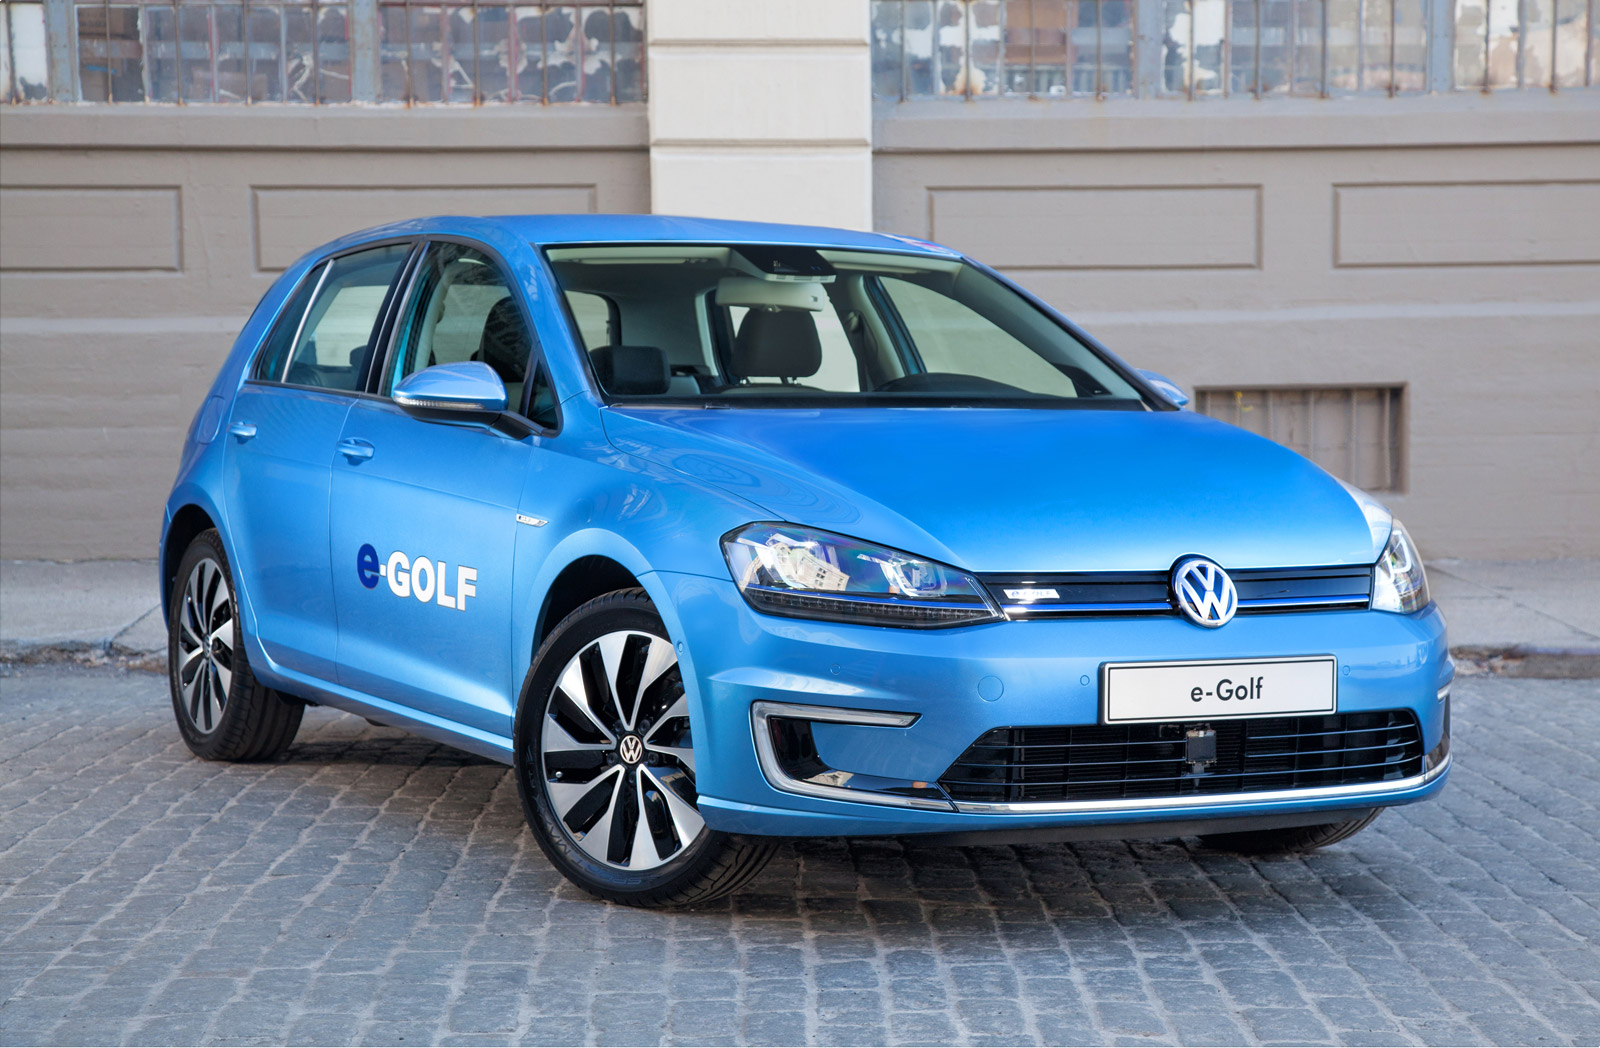 2015 Volkswagen e-Golf Price To Start At $36,265, Top Trim Level Only